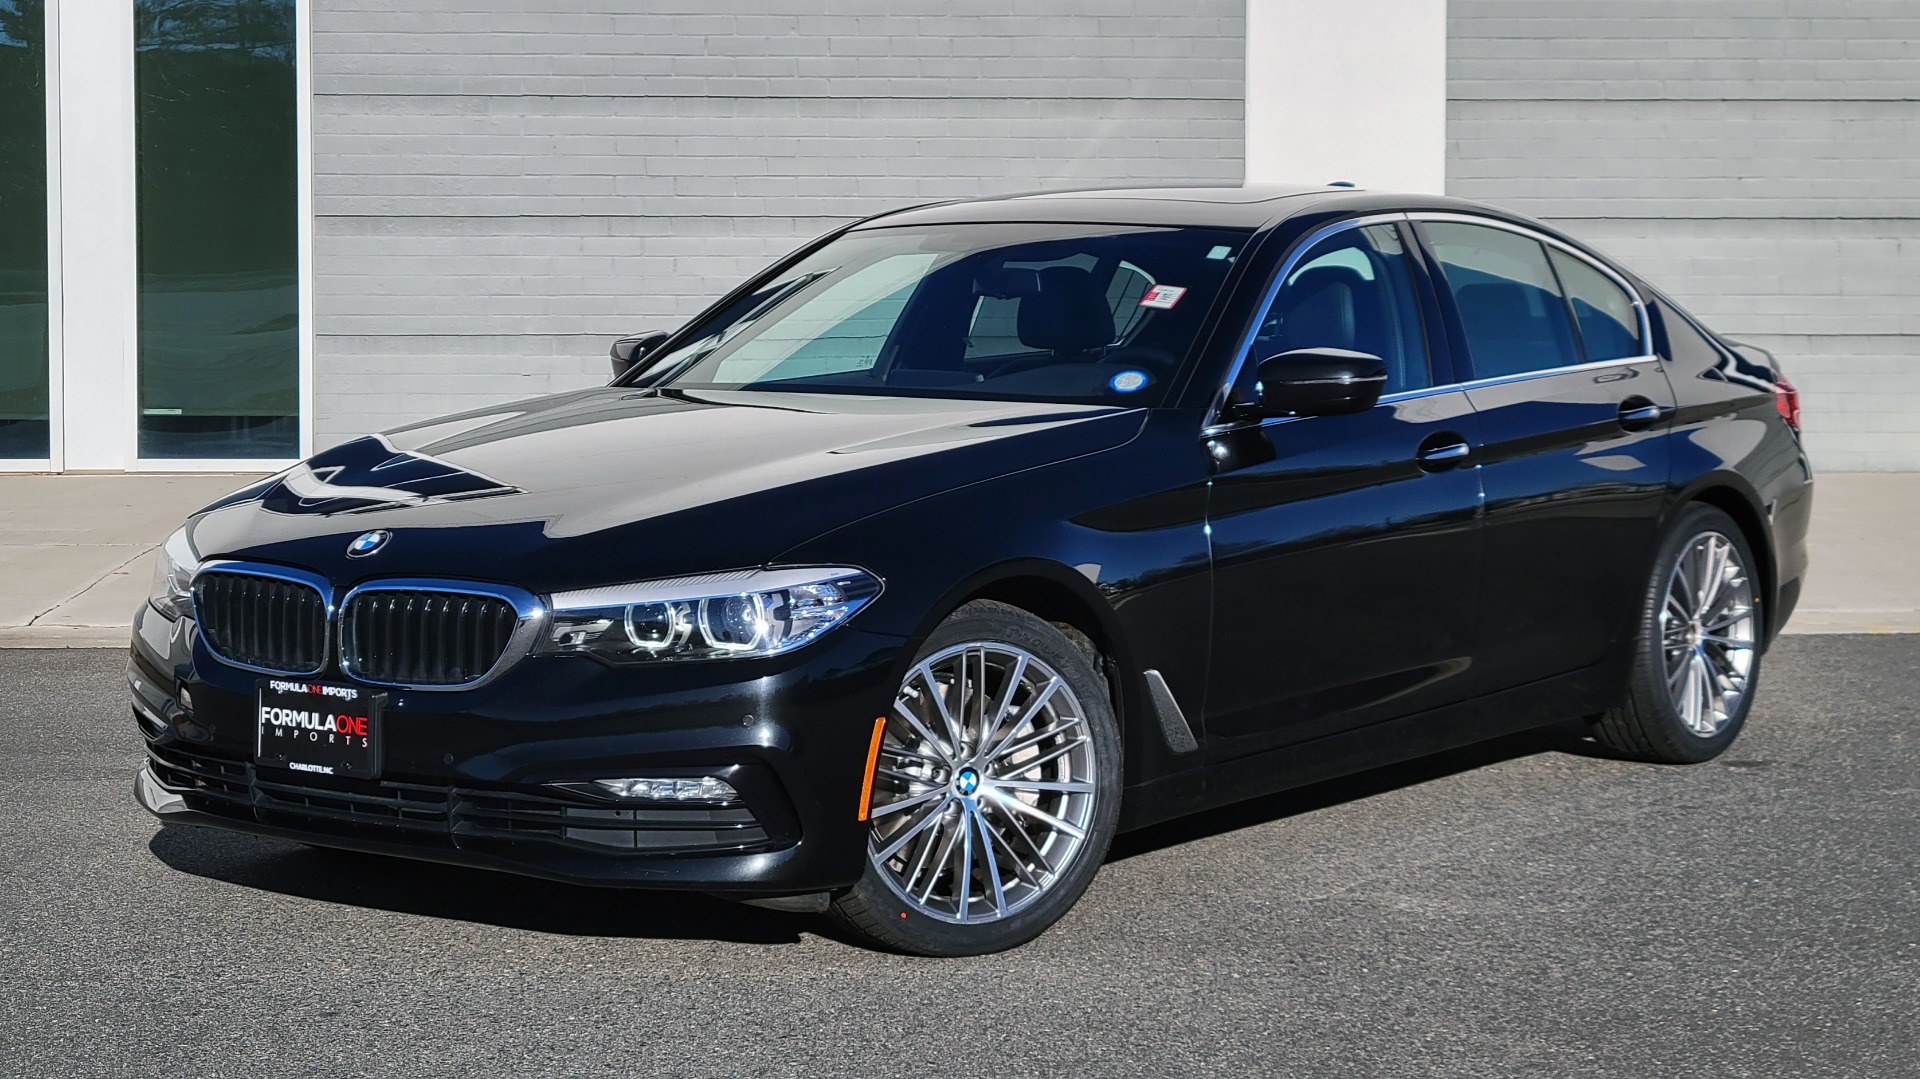 Used 2017 BMW 5 SERIES 530I XDRIVE PREMIUM / NAV / SUNROOF / PARK ASST / COLD WTHR / RE for sale Sold at Formula Imports in Charlotte NC 28227 1